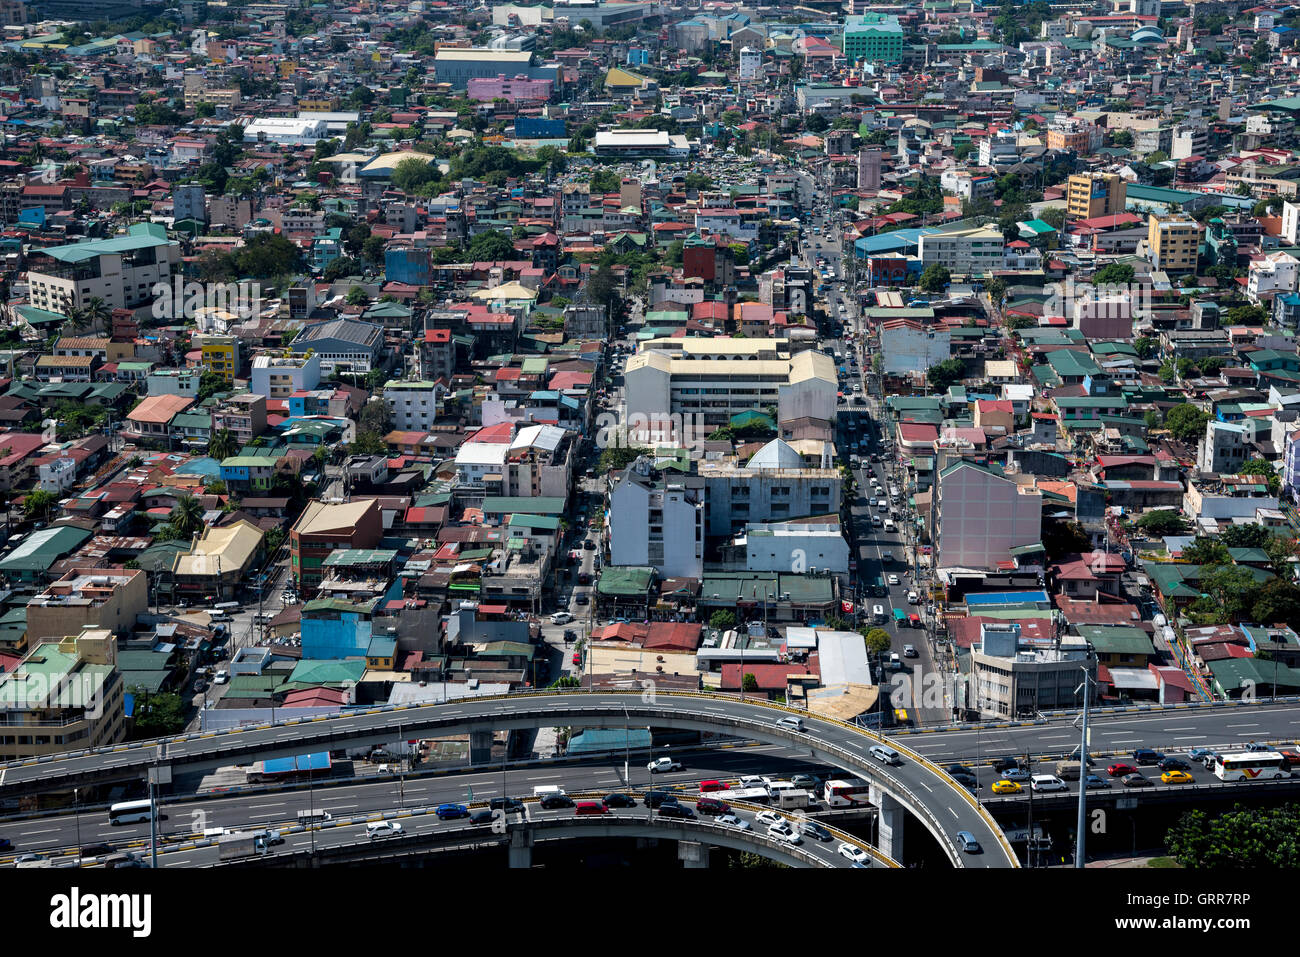 The Metro Manila Skyway in the foreground and various houses and buildings in the background, Manila, Philippines. Stock Photo